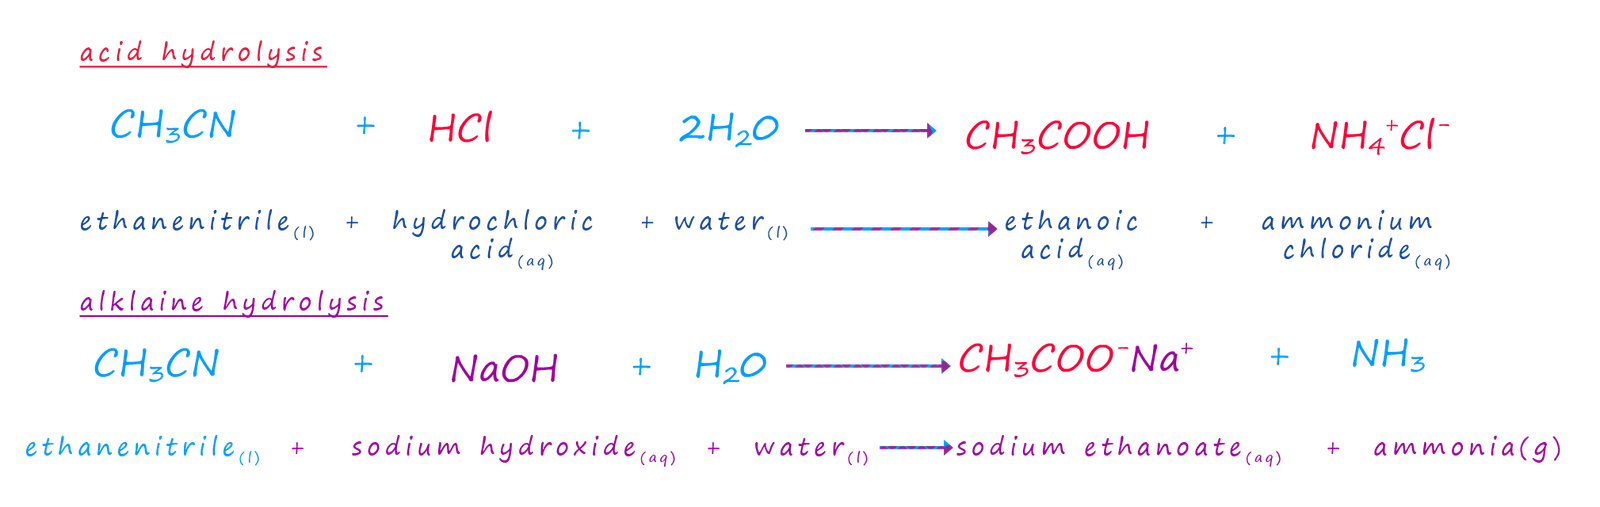 equations to show acidic and alklaine hydrolysis of nitriles to give carboxylic acids